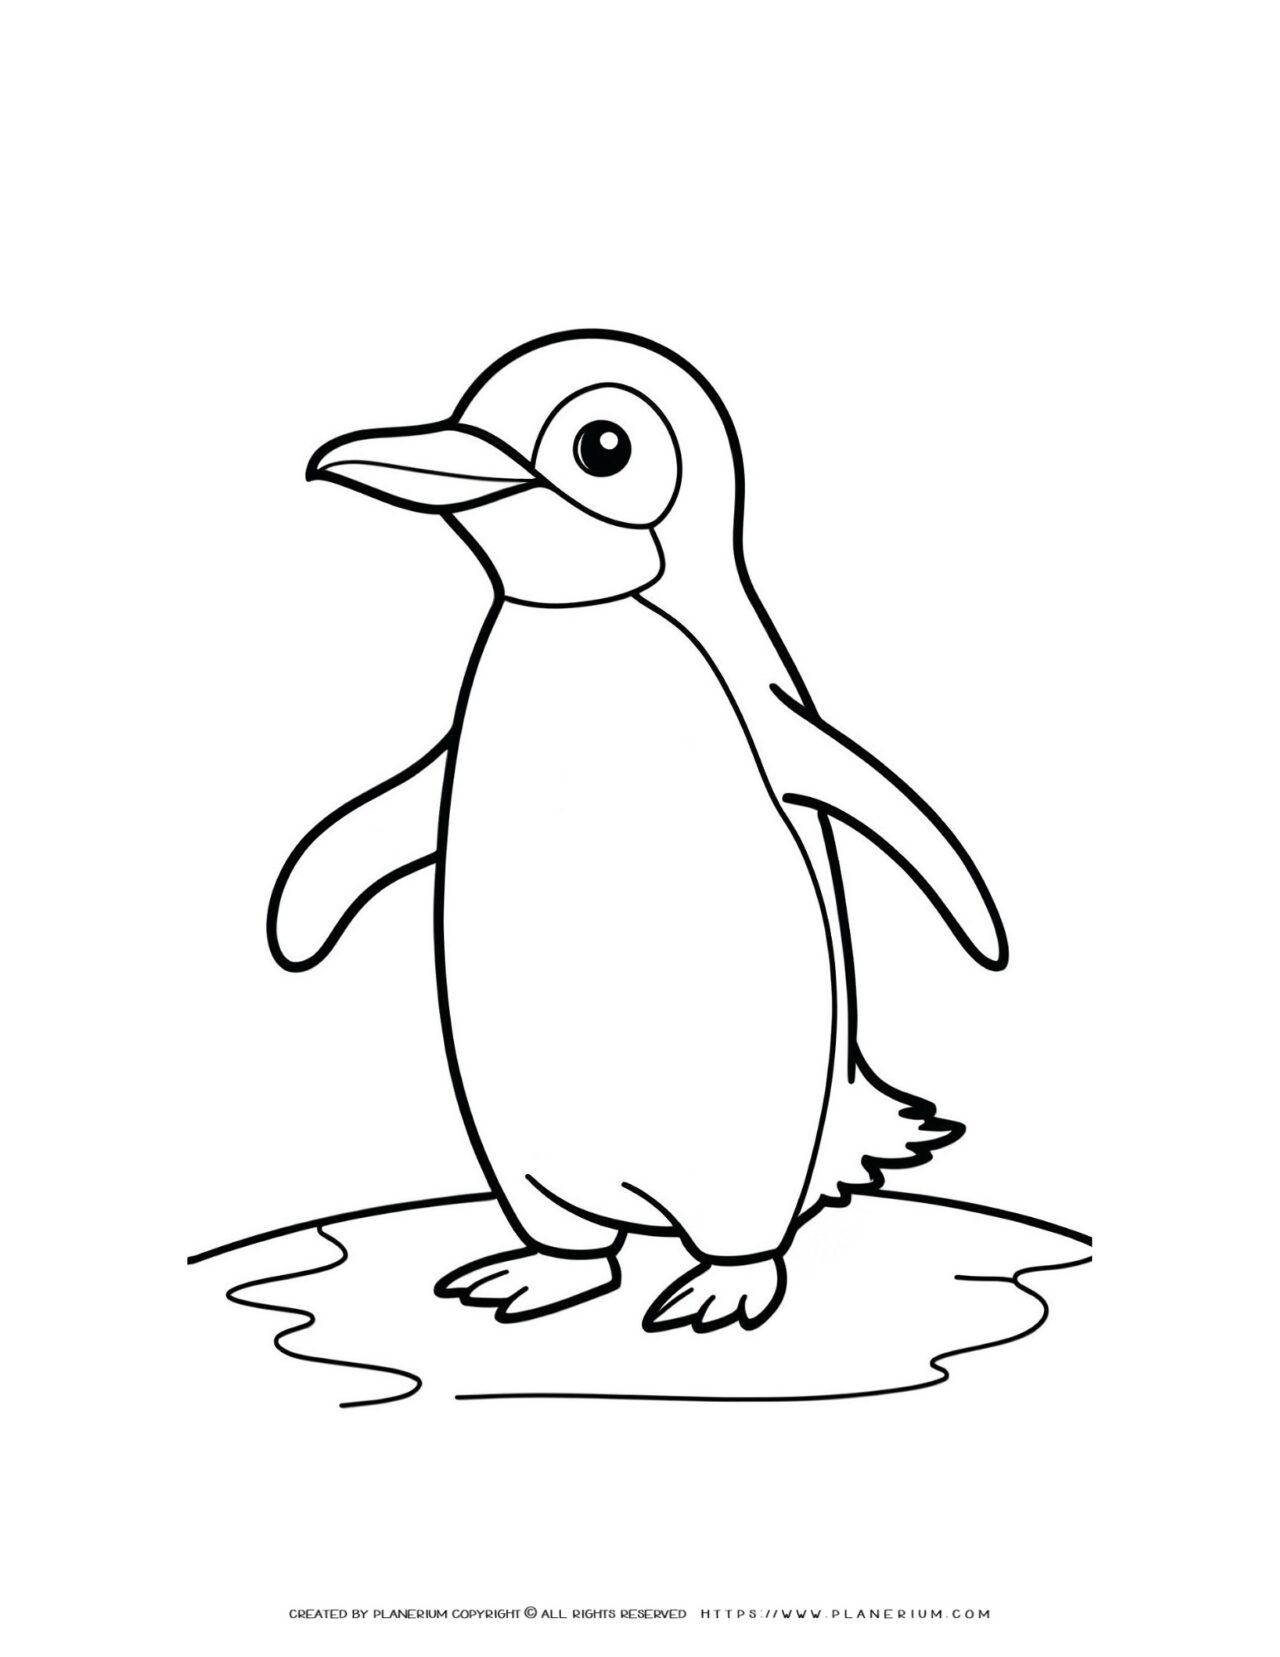 Printable-penguin-coloring-page-illustration